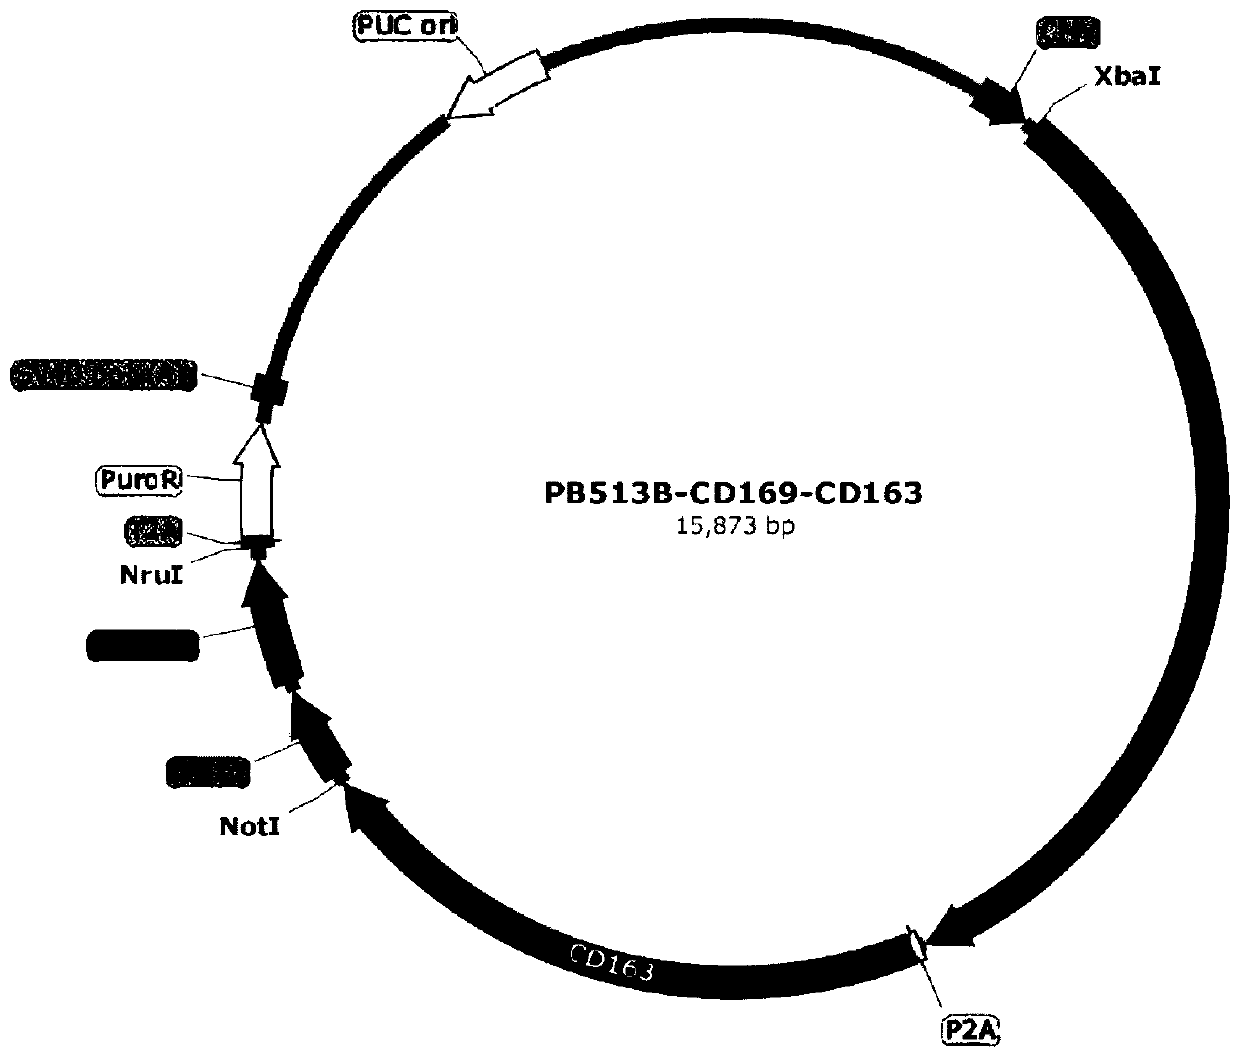 Suspension Marc145 cell line for expressing porcine CD163 and CD169 molecules